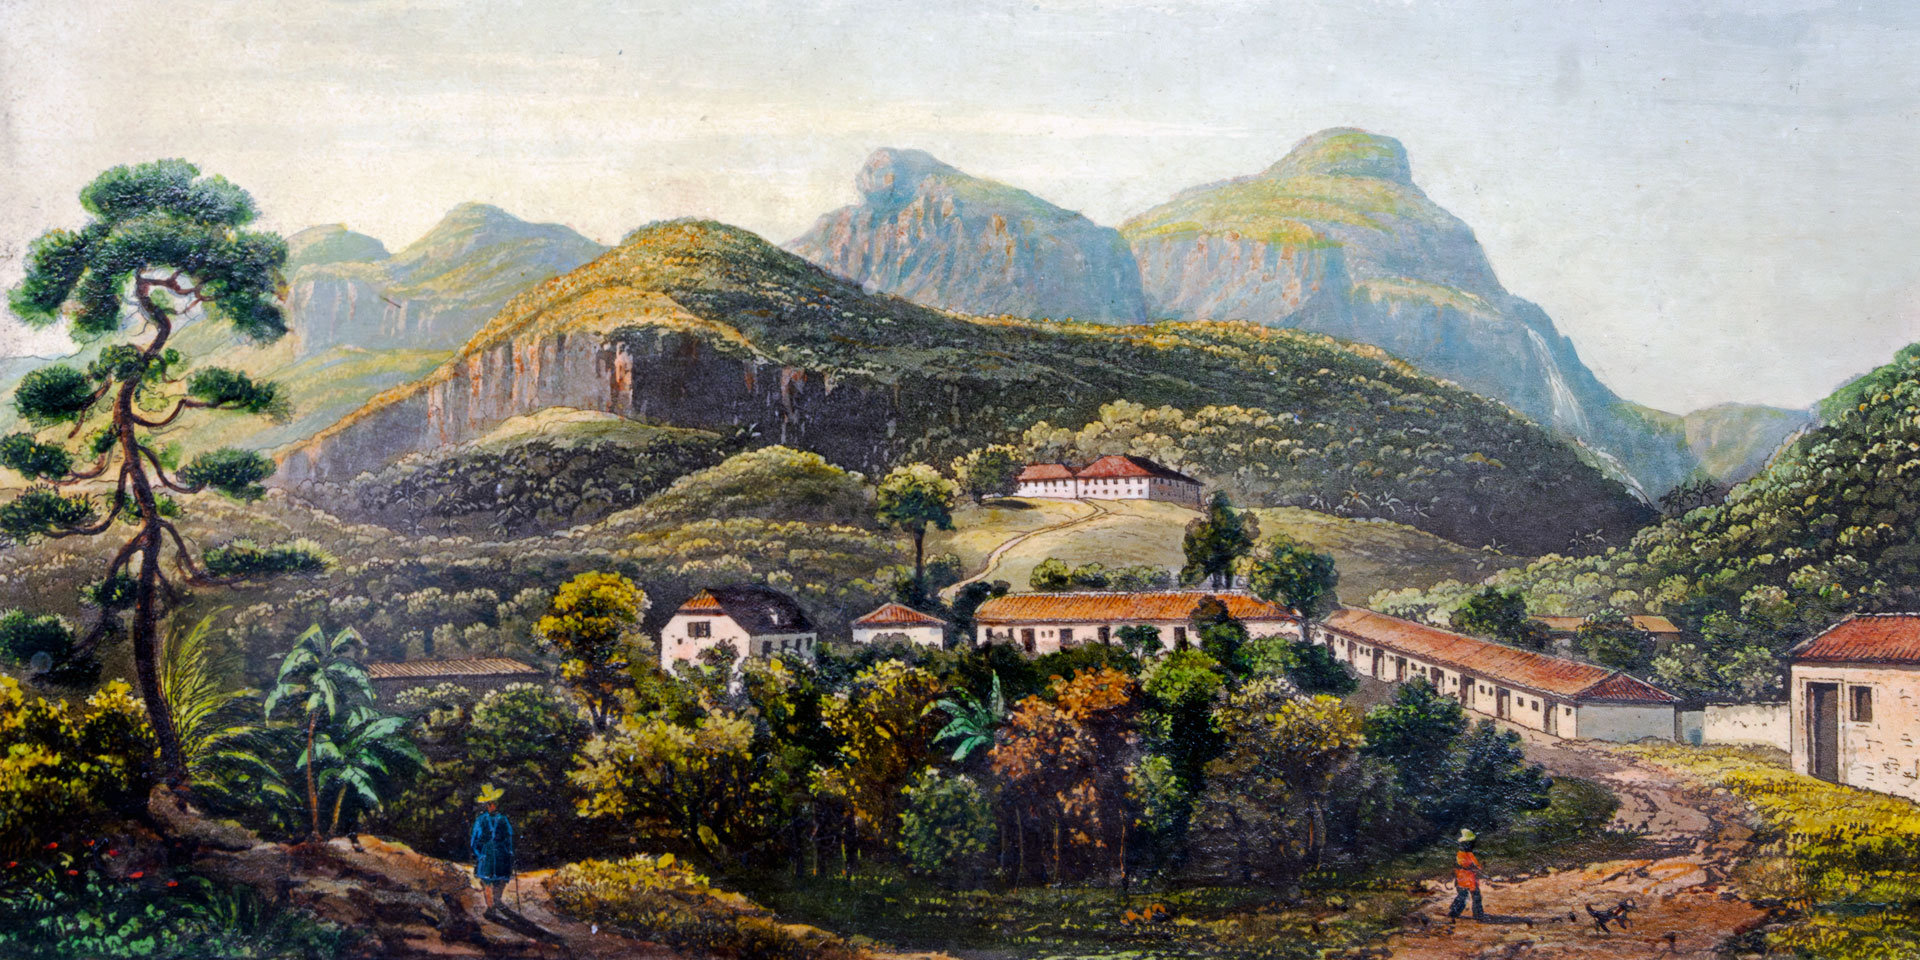 Painting depicting a mountainous landscape in Brazil with houses in the foreground.